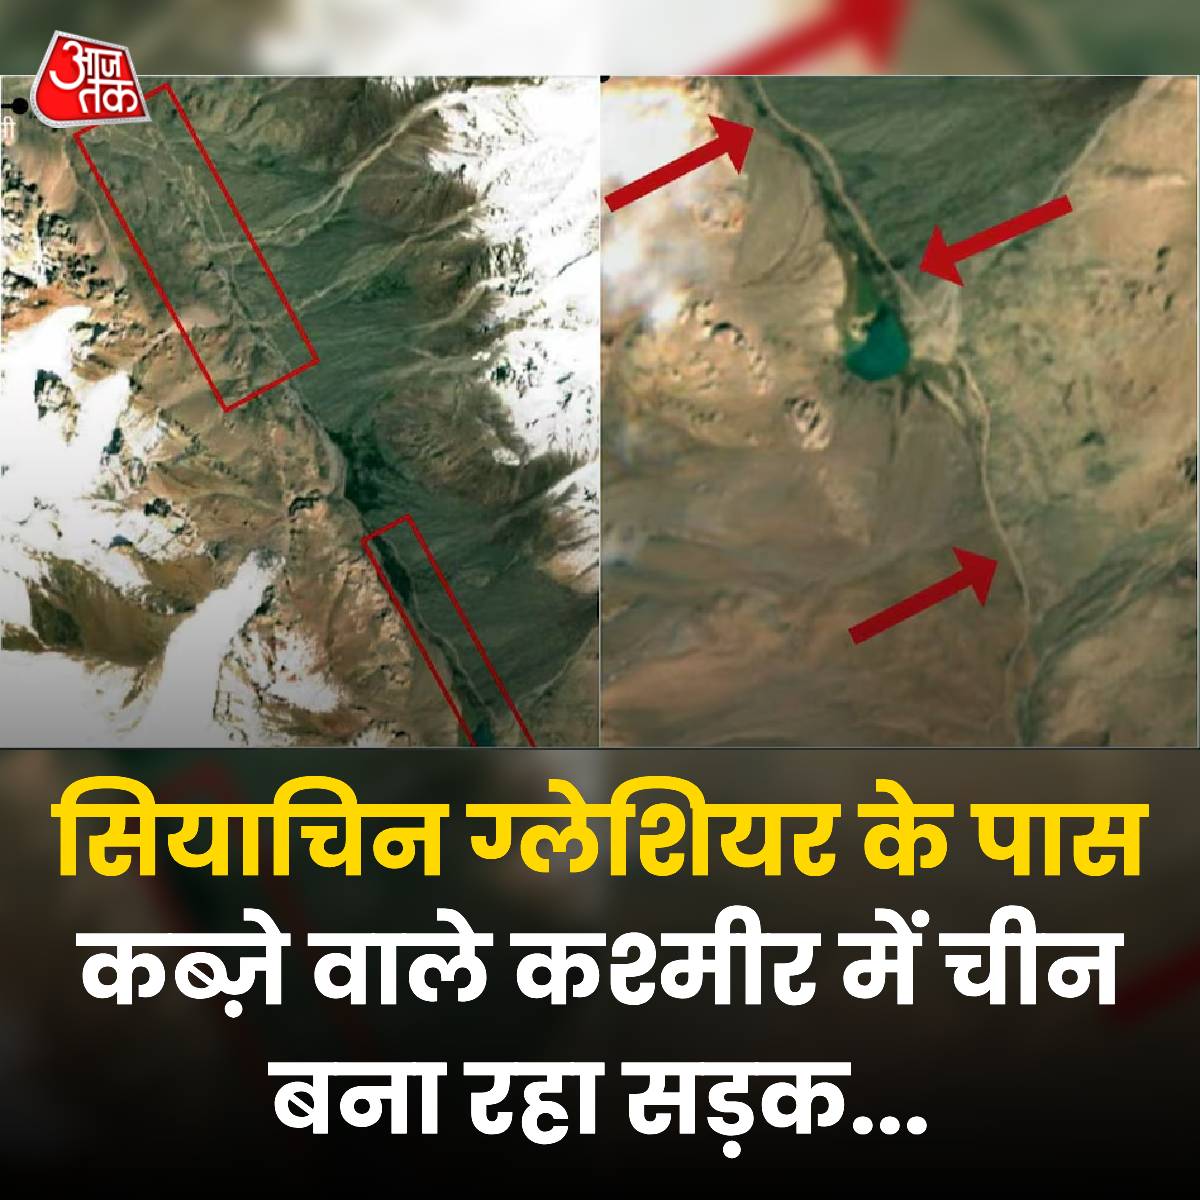 -Defense minister Rajnath Singh rushed Siachen in mid of Elections.

-But as usual, they try to cover up,

-Now Its all over media,

-China is building Road in our Occupied area.

Narendra Modi is quite & denial, why?

हमारे जमीन भी Safe नहीं है, यह मंगलसूत्र की बात करते है!🤐🤦